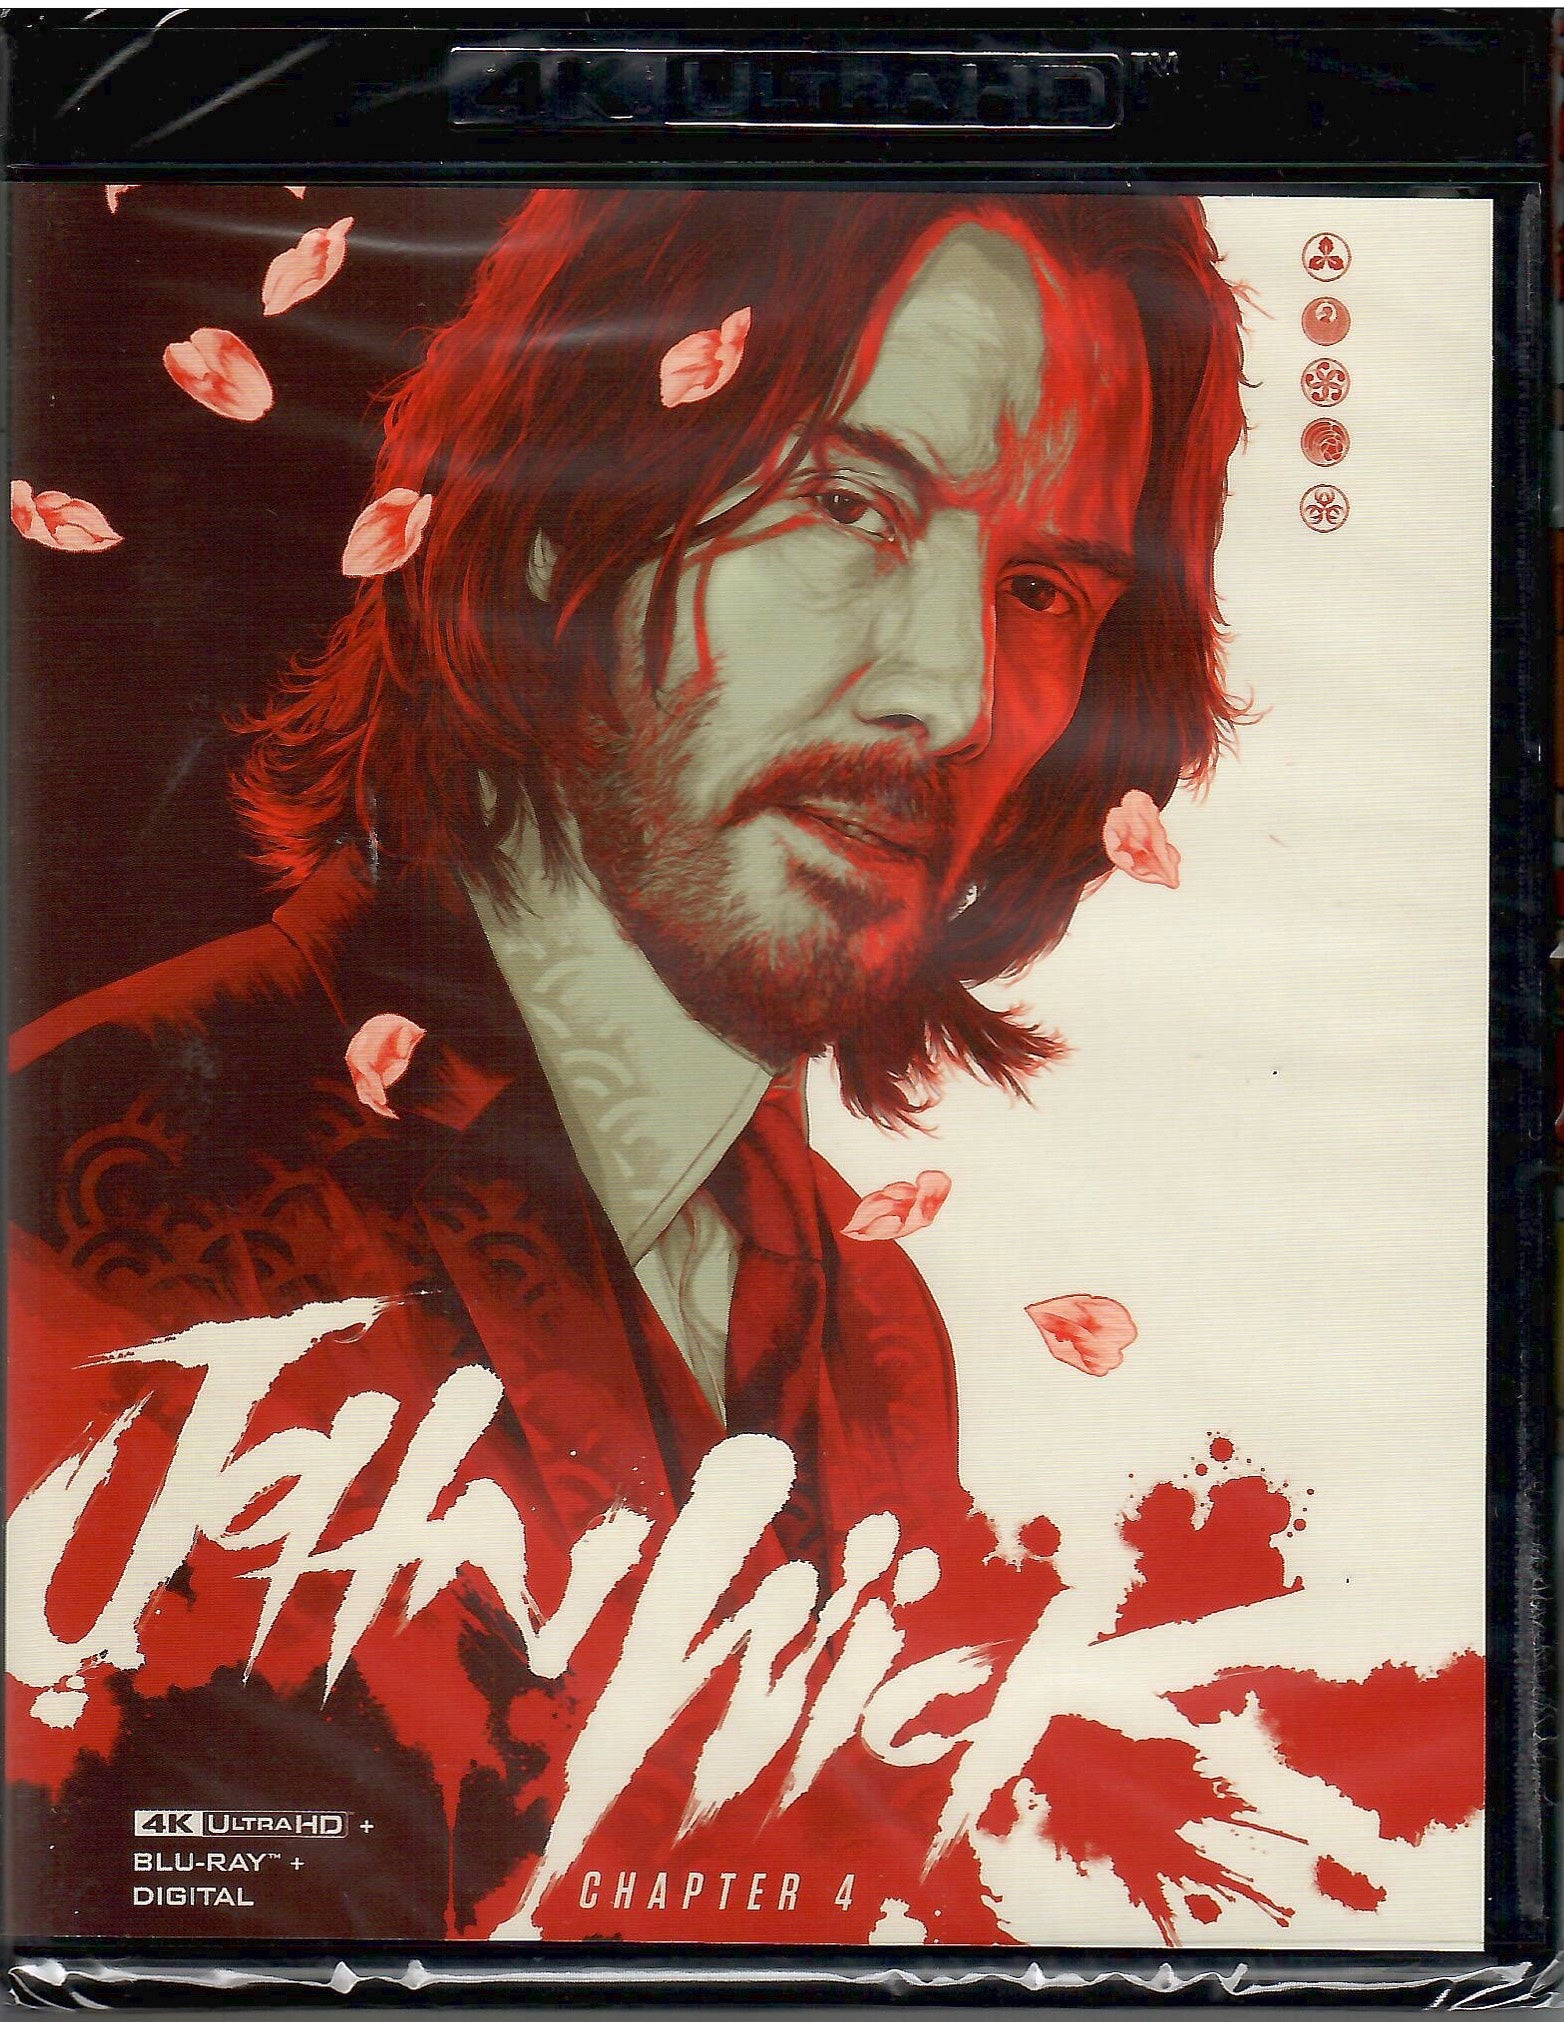 John Wick: Chapter 4 (2023) DVD Cover by CoverAddict on DeviantArt